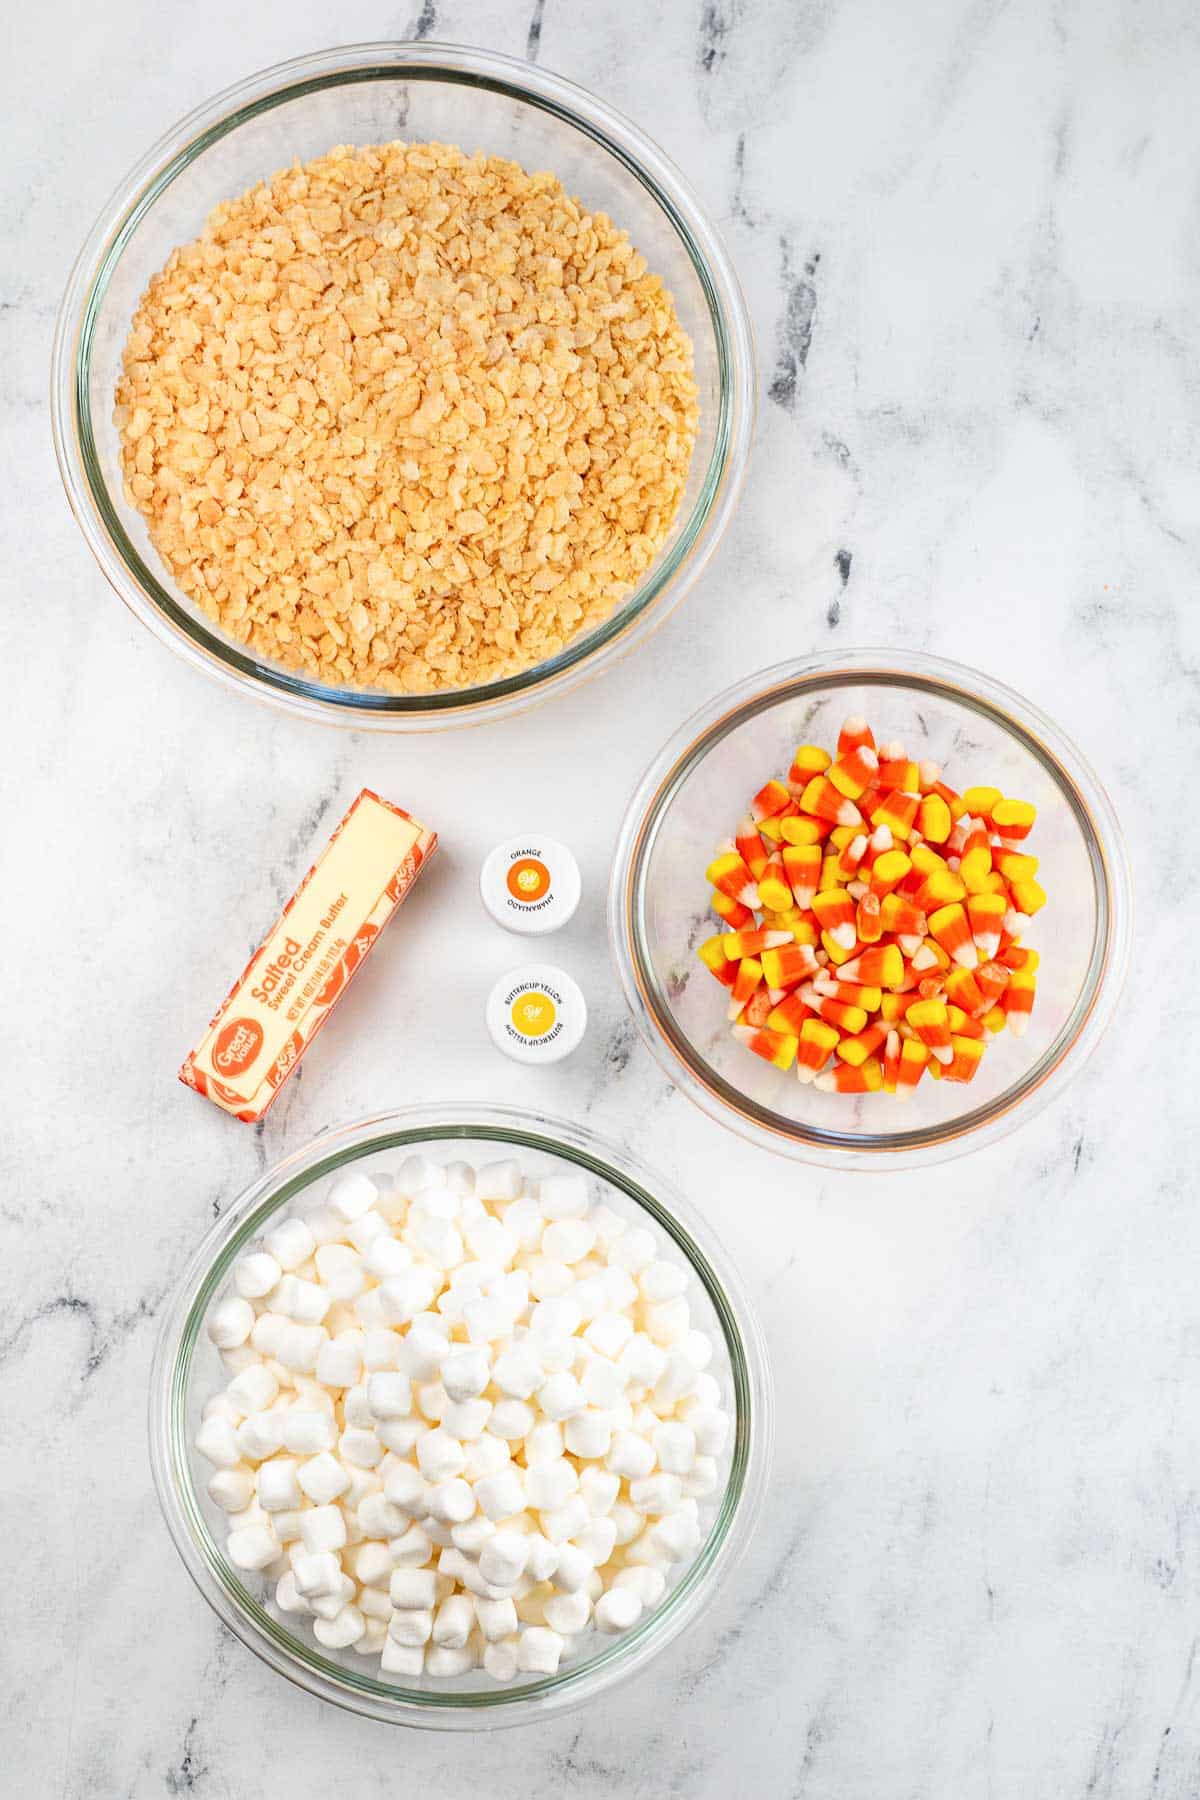 three glass bowls - one with mini marshmallows, one with candy corn and one with rice krispie cereal, a stick of butter